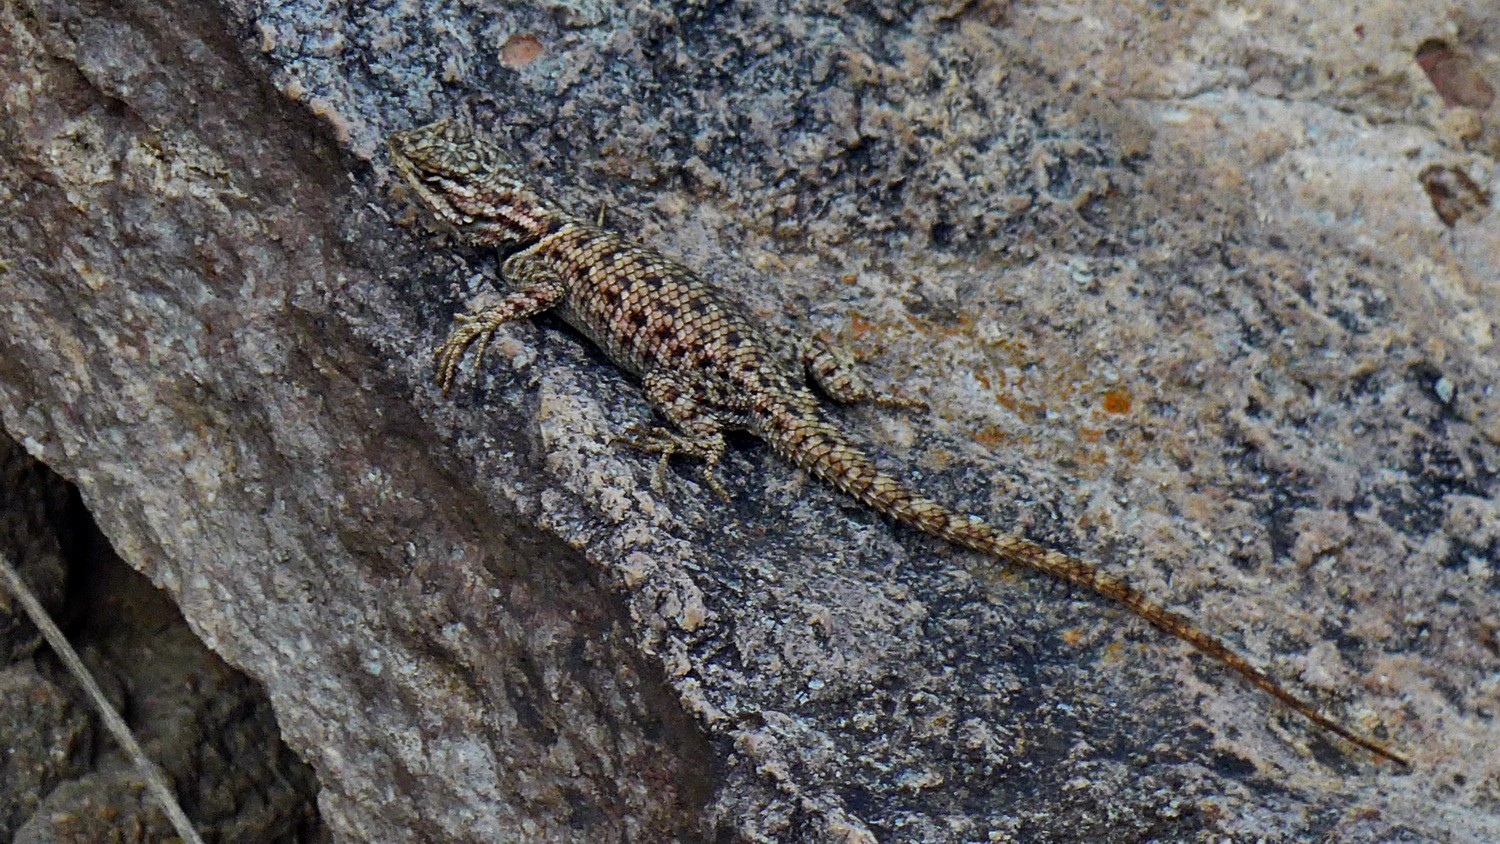 Lizard - good adapted to the rock!